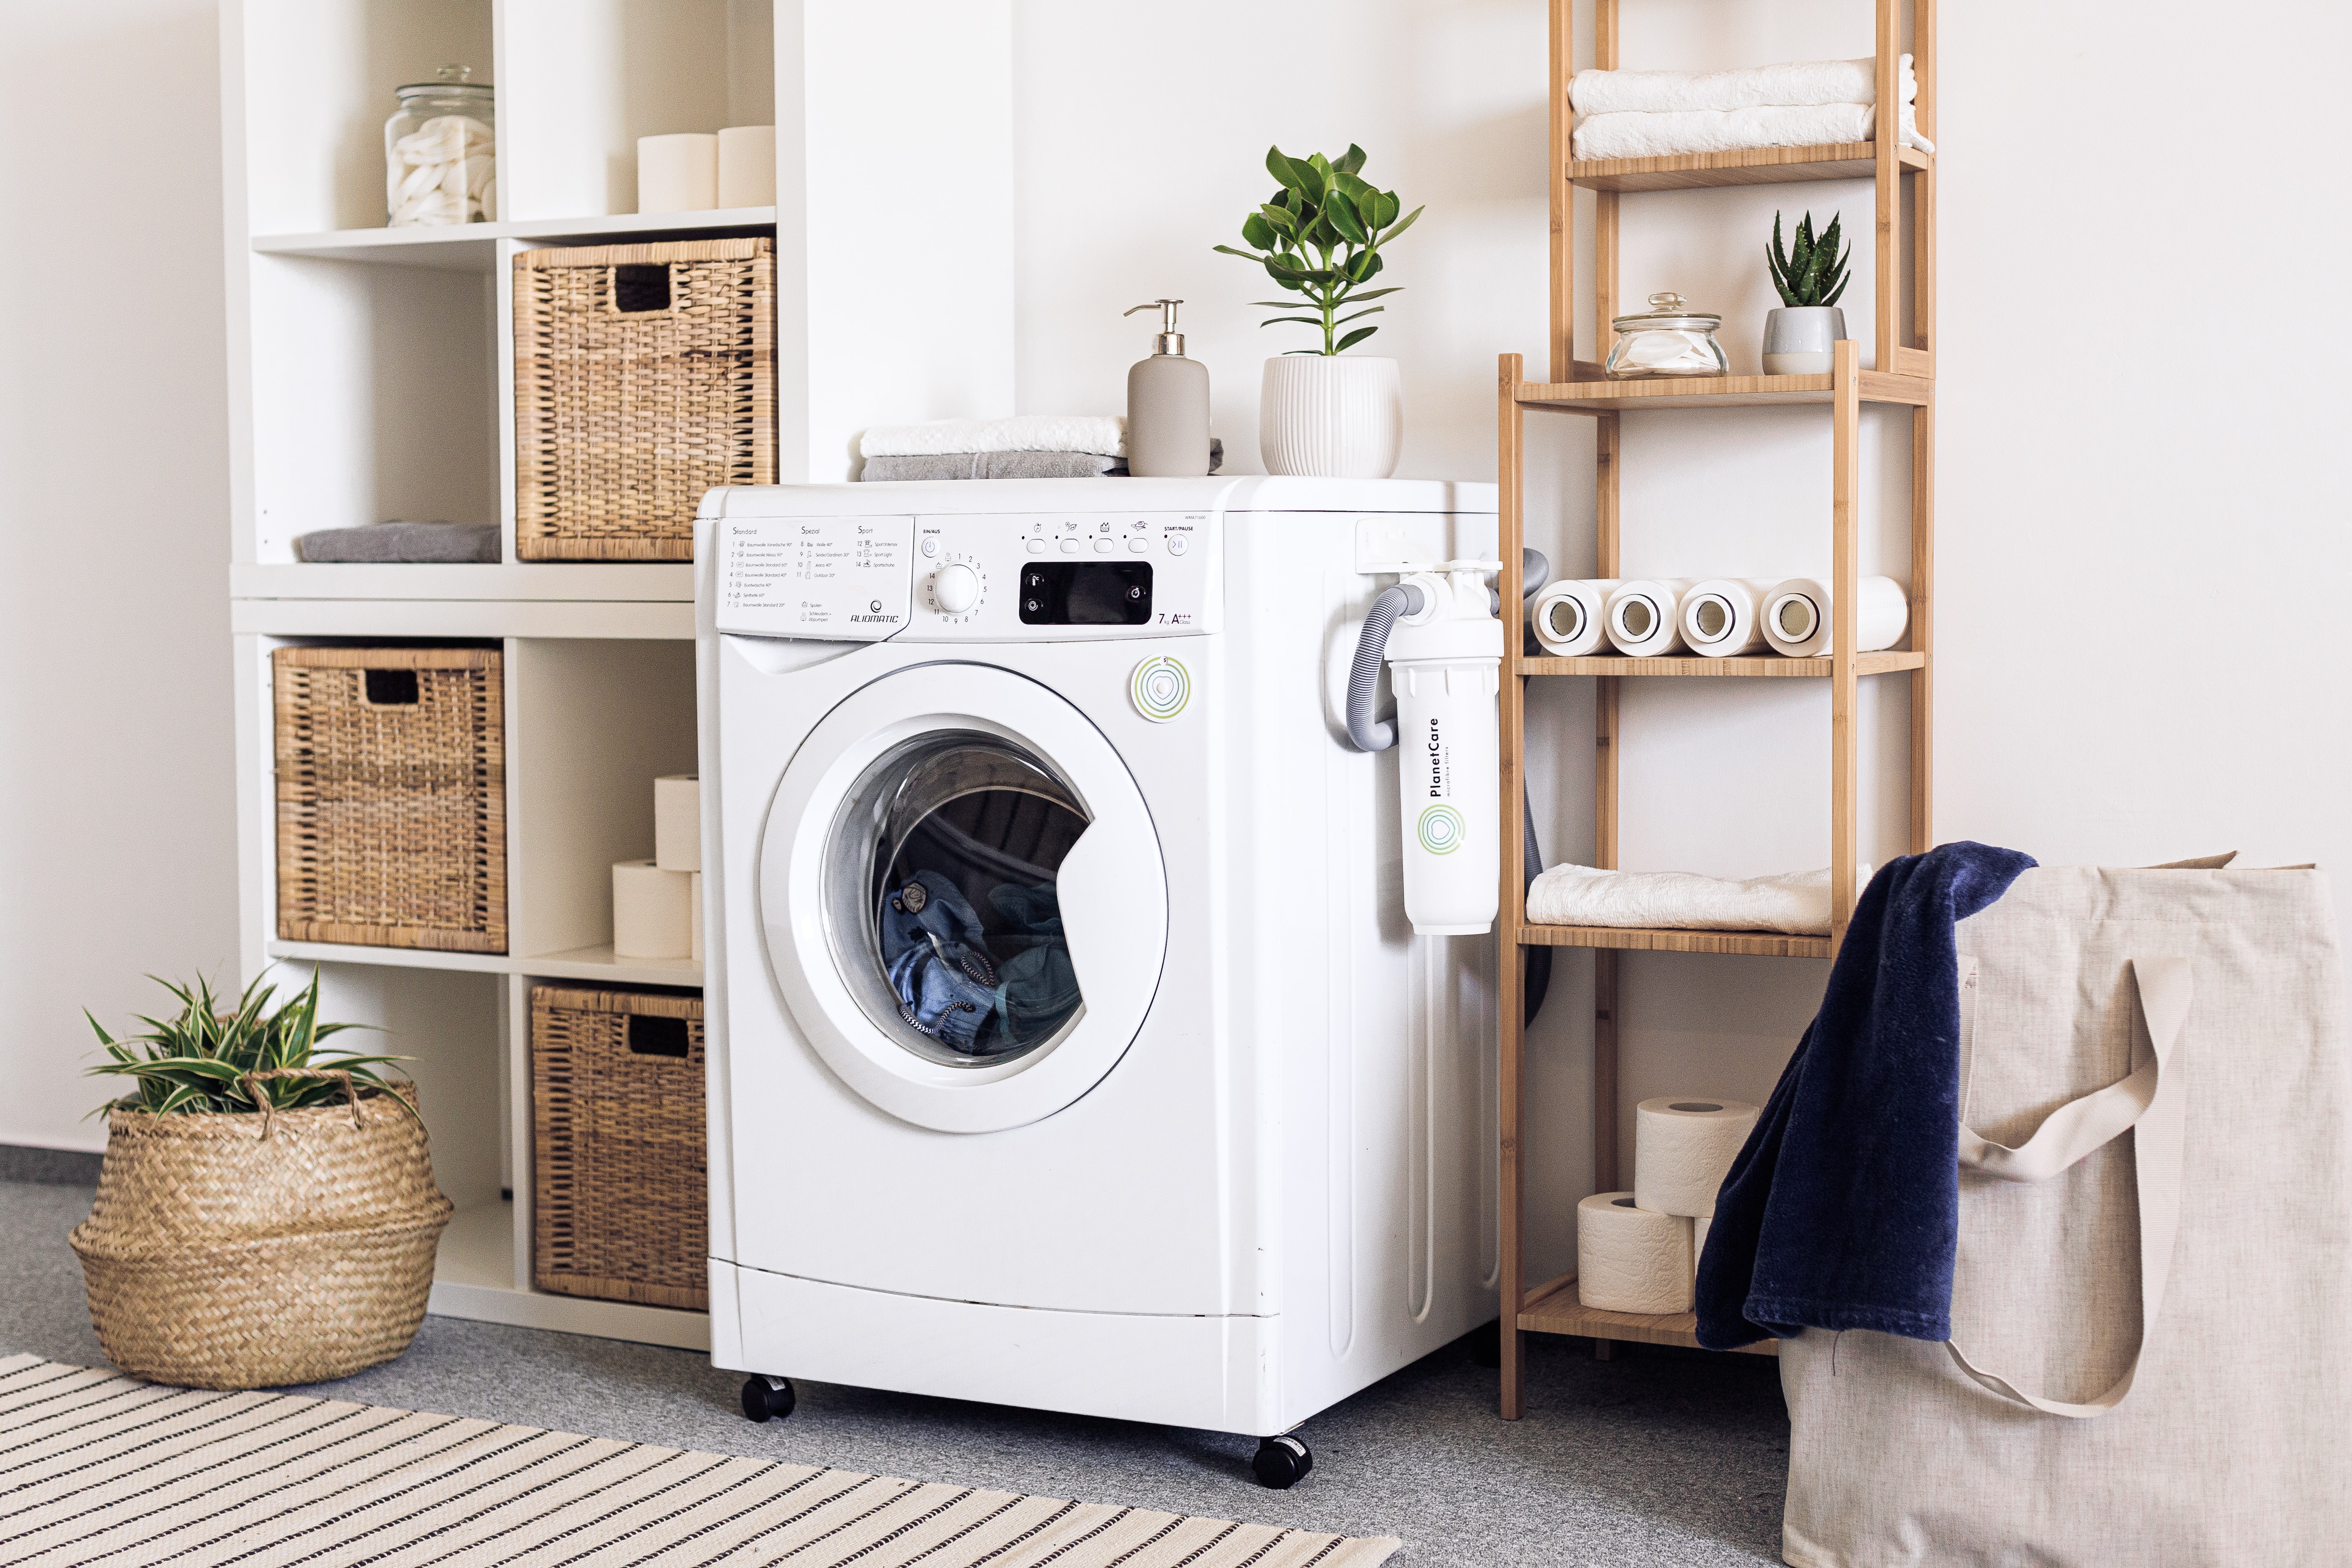 3 Helpful Hacks for the Laundry Room's featured image